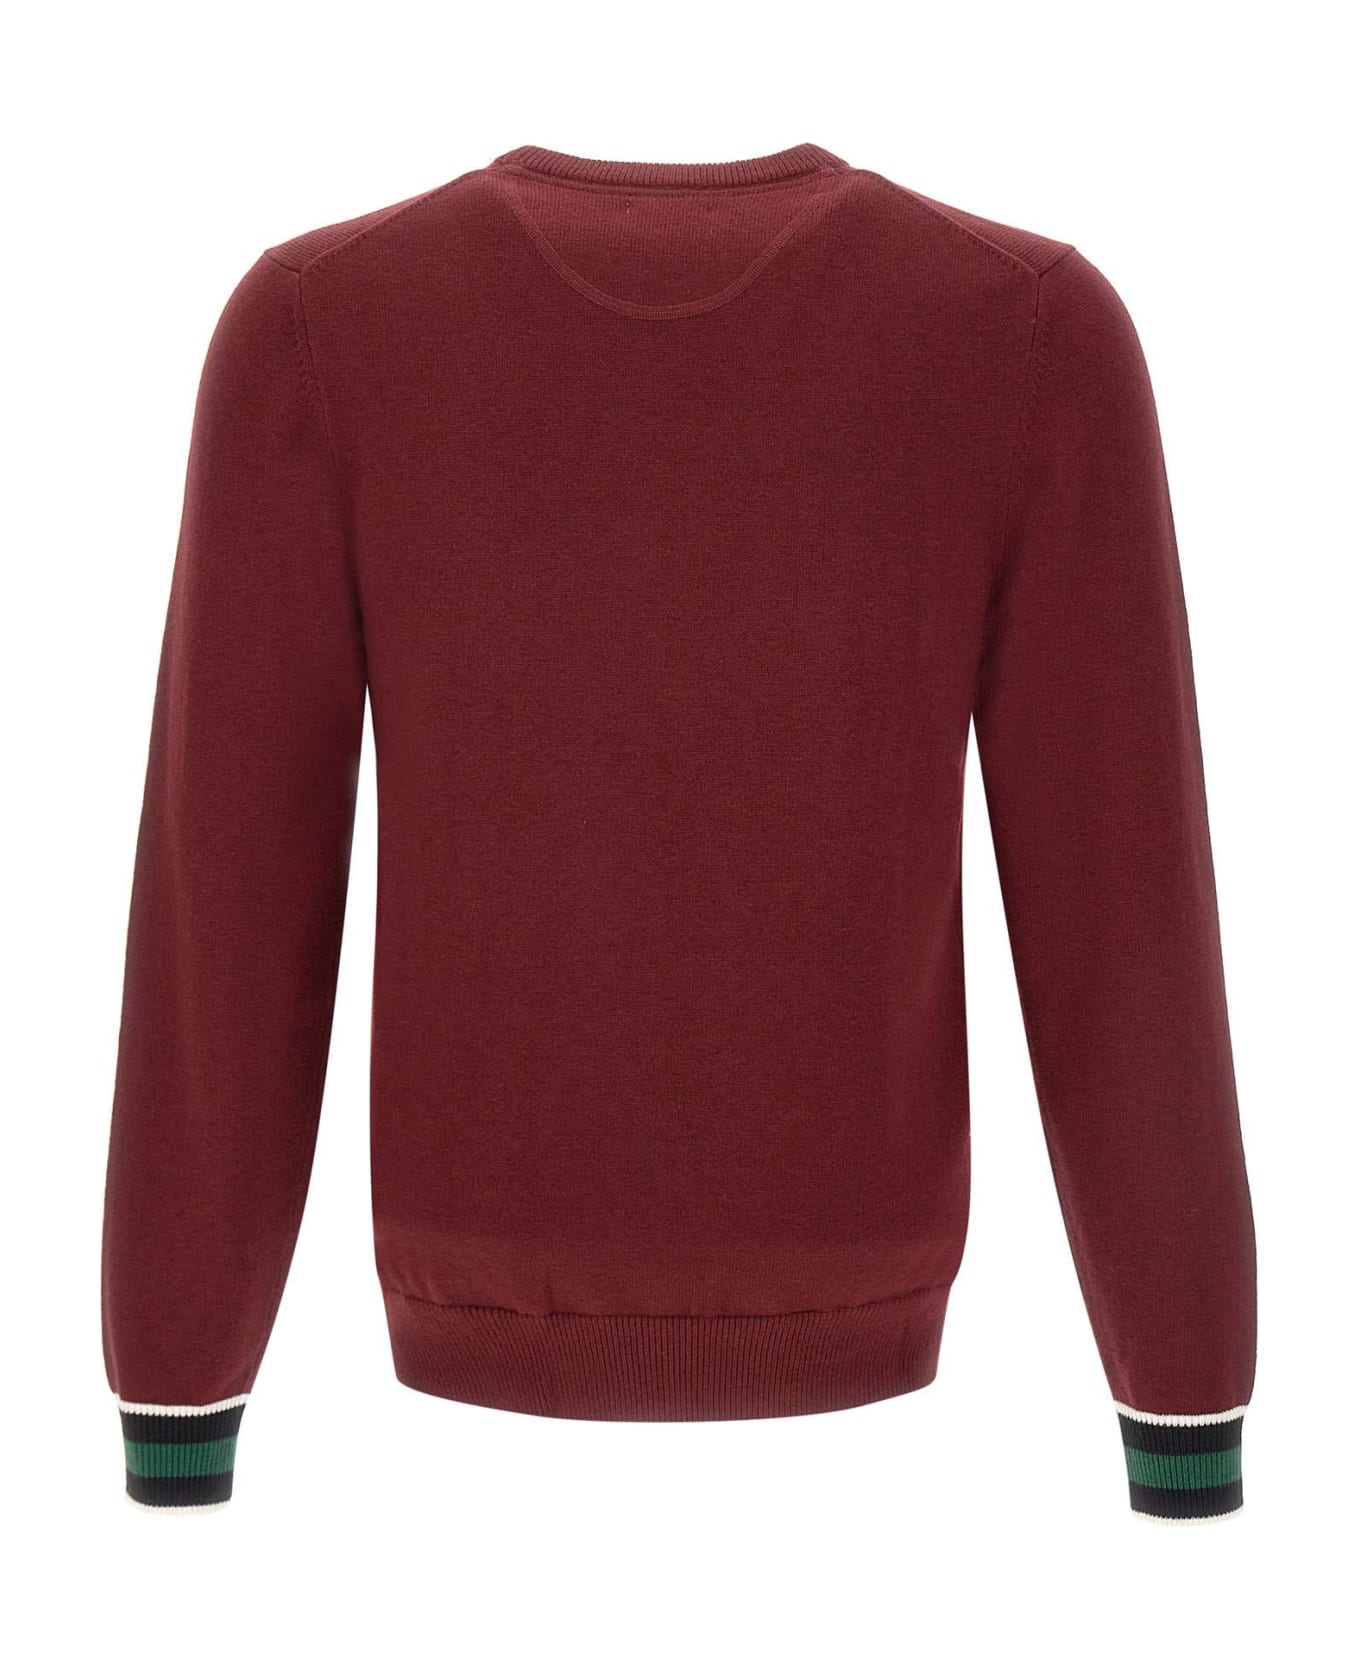 Sun 68 Cotton And Wool Sweater - RED